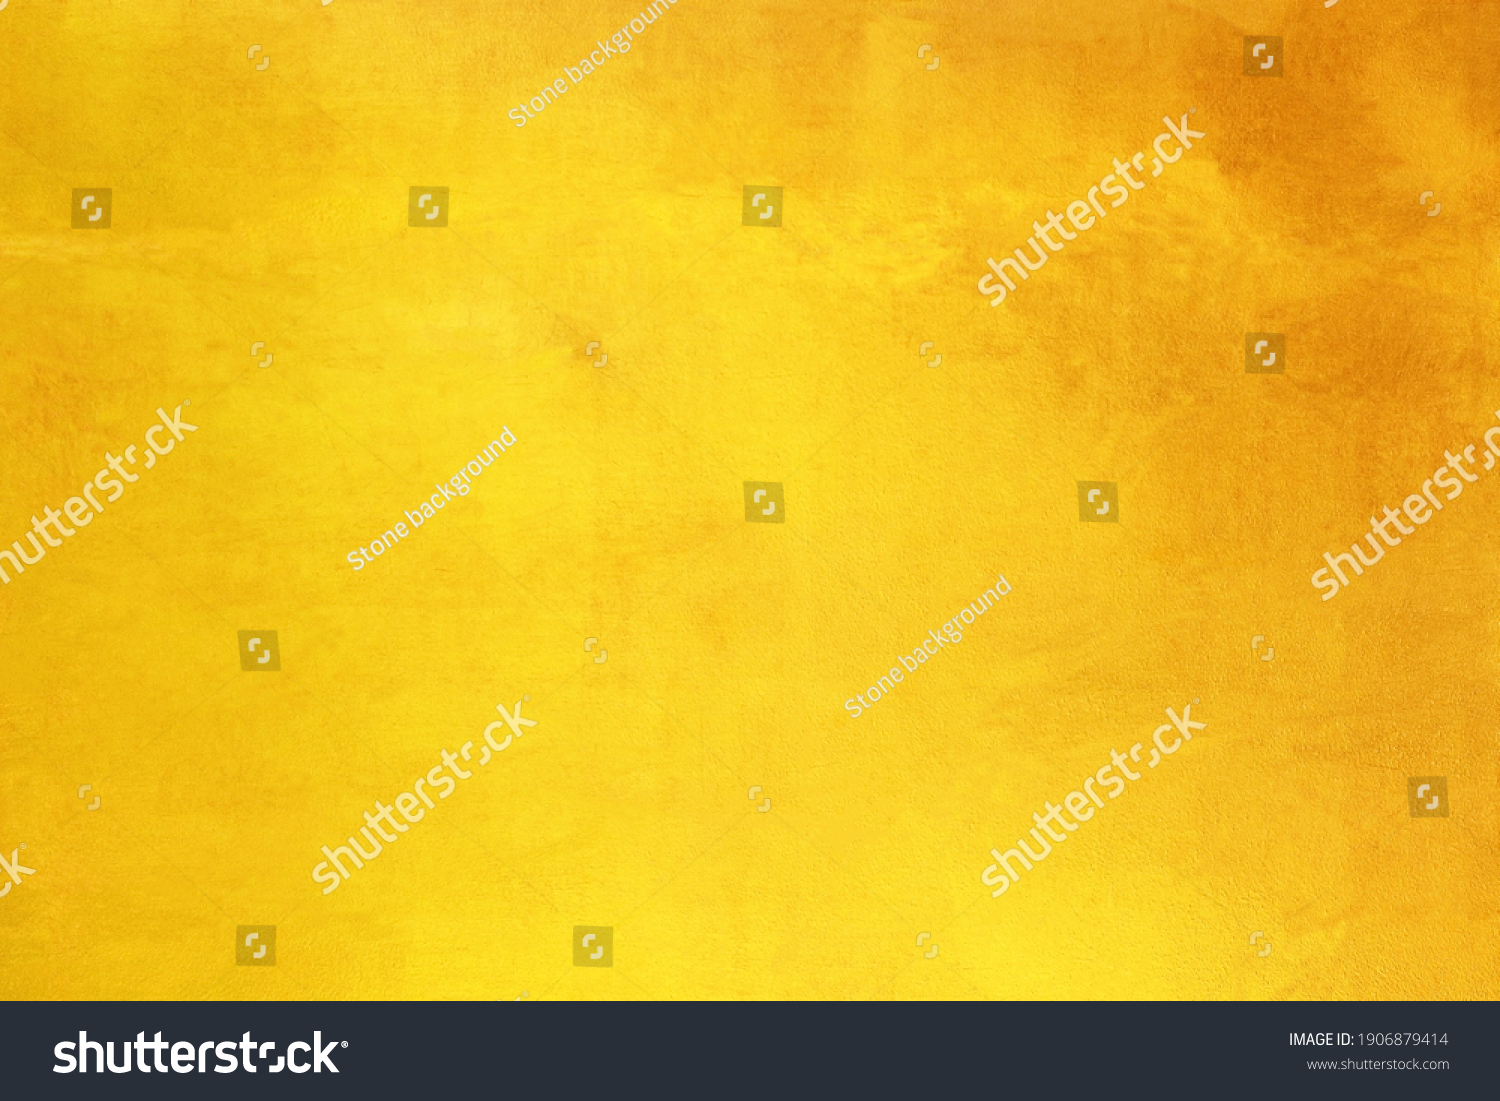 Gold background or texture and gradients shadow. gold polished metal steel texture abstract background. #1906879414